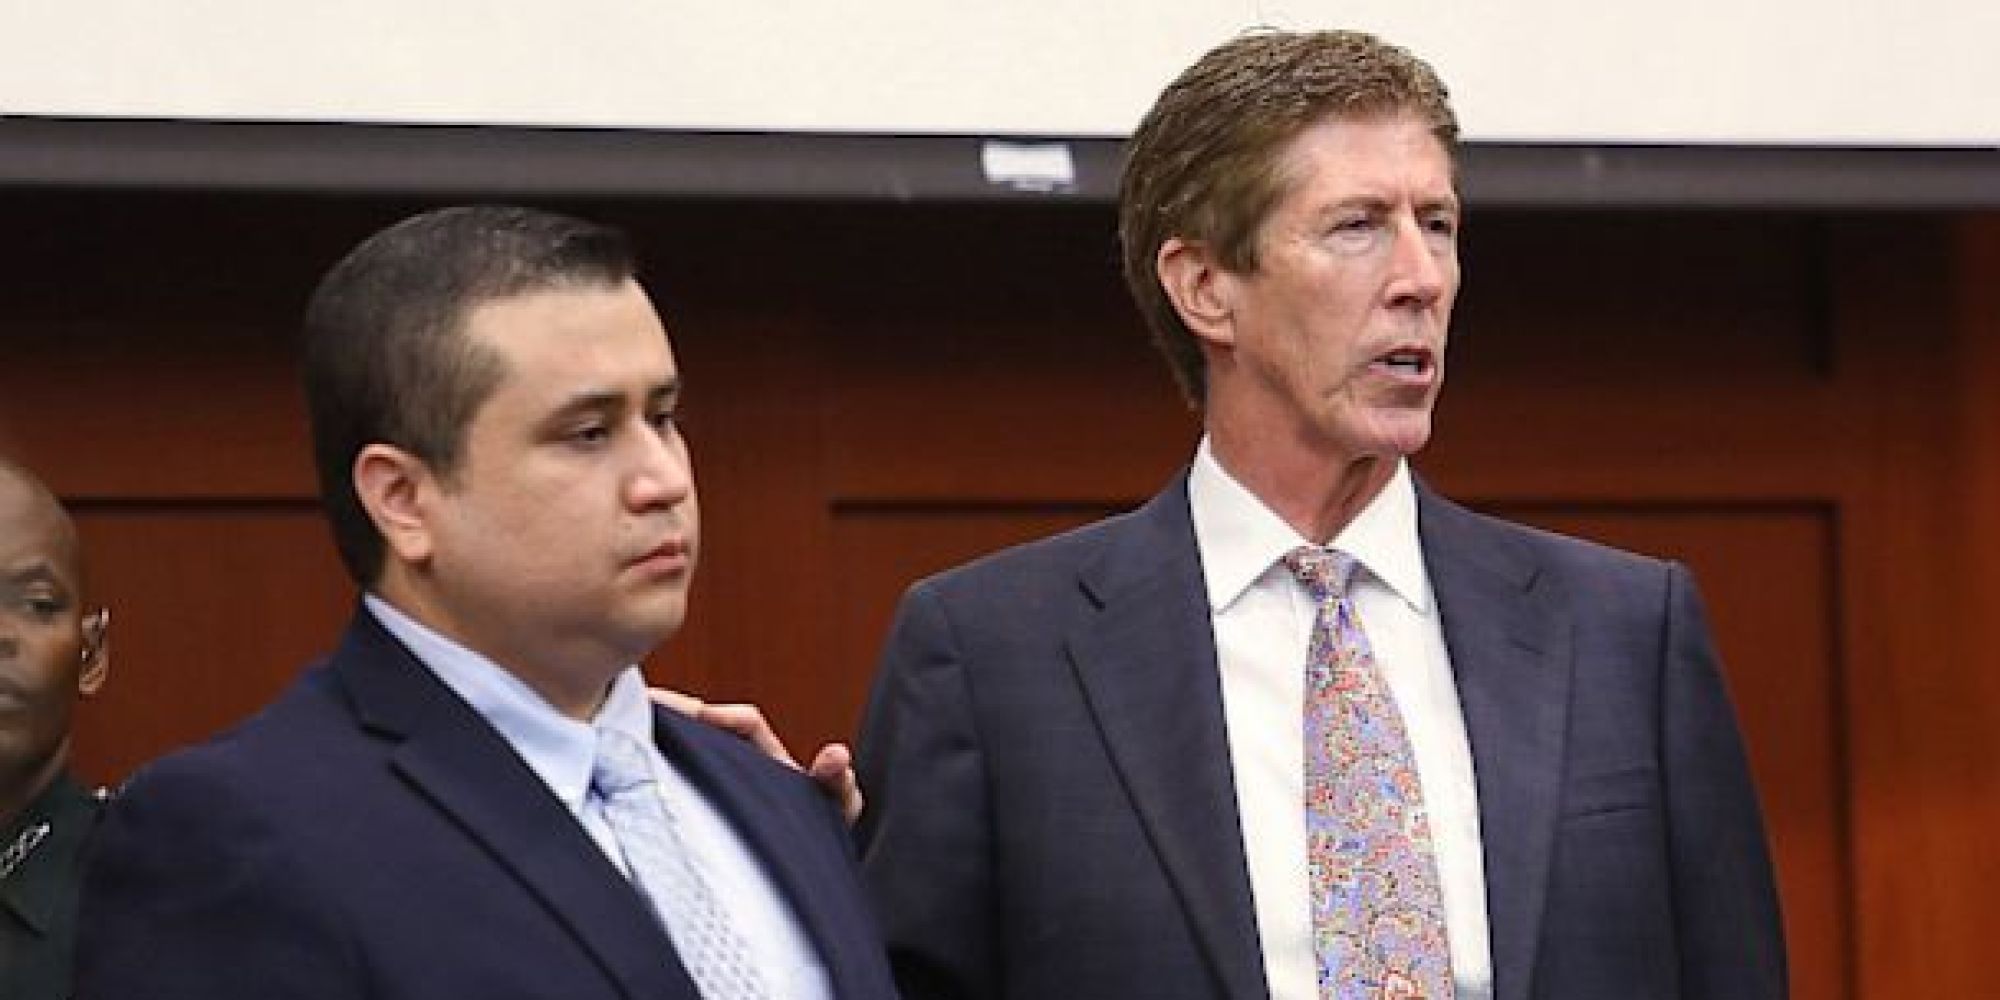 Mark O'Mara, George Zimmerman Attorney, Faces Ethics Complaint From Trayvon Martin ...